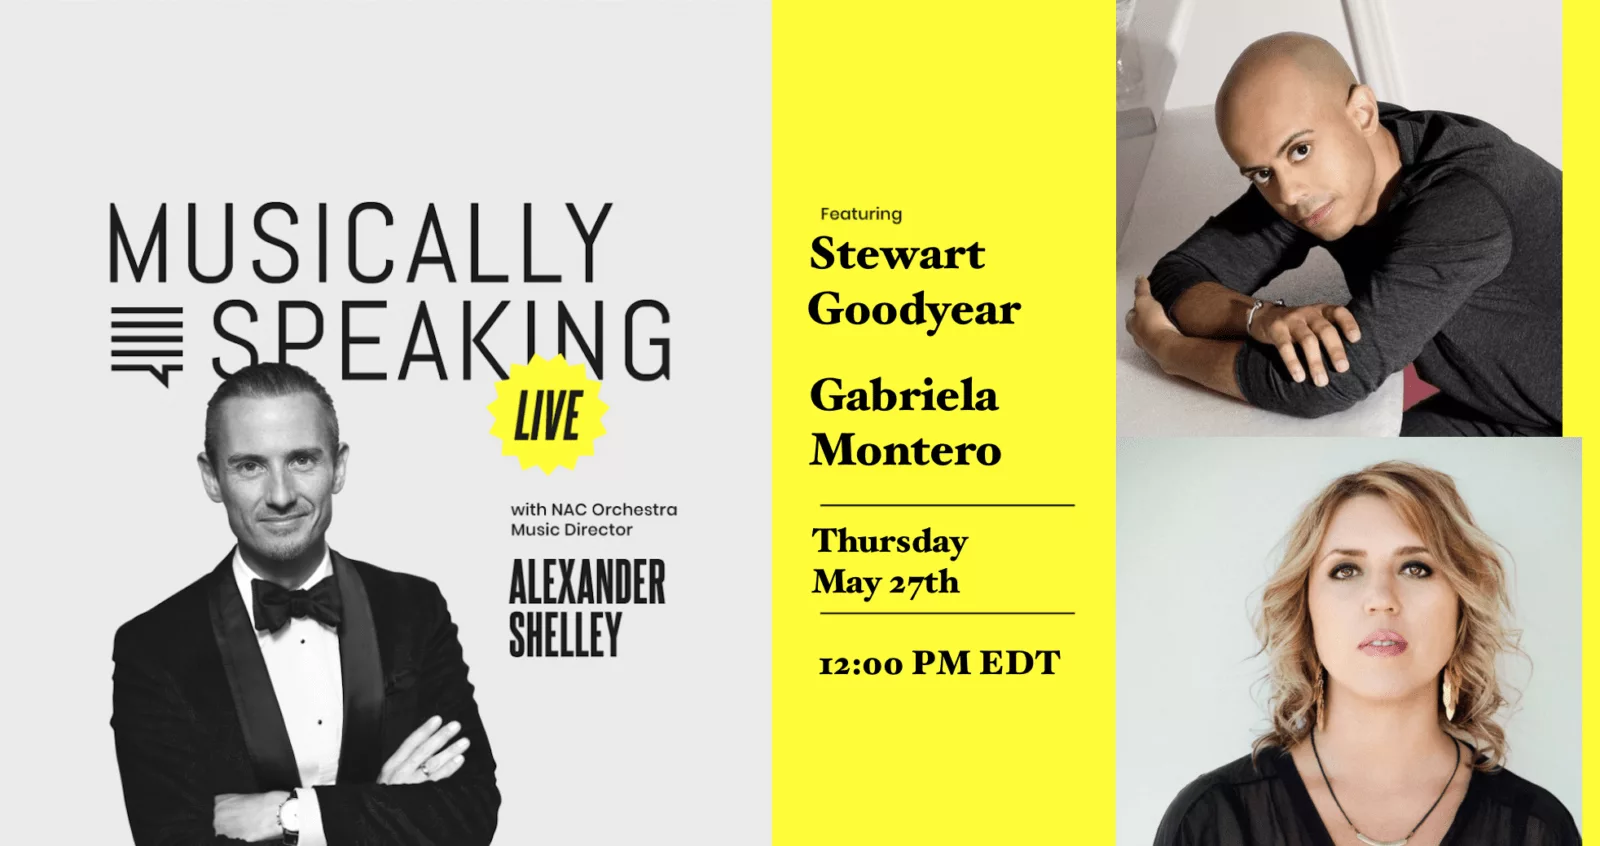 Musically Speaking: Join Alexander Shelley as he chats with Gabriela Montero and Stewart Goodyear about how a composer-performer uses an adaptive mindset in their work.